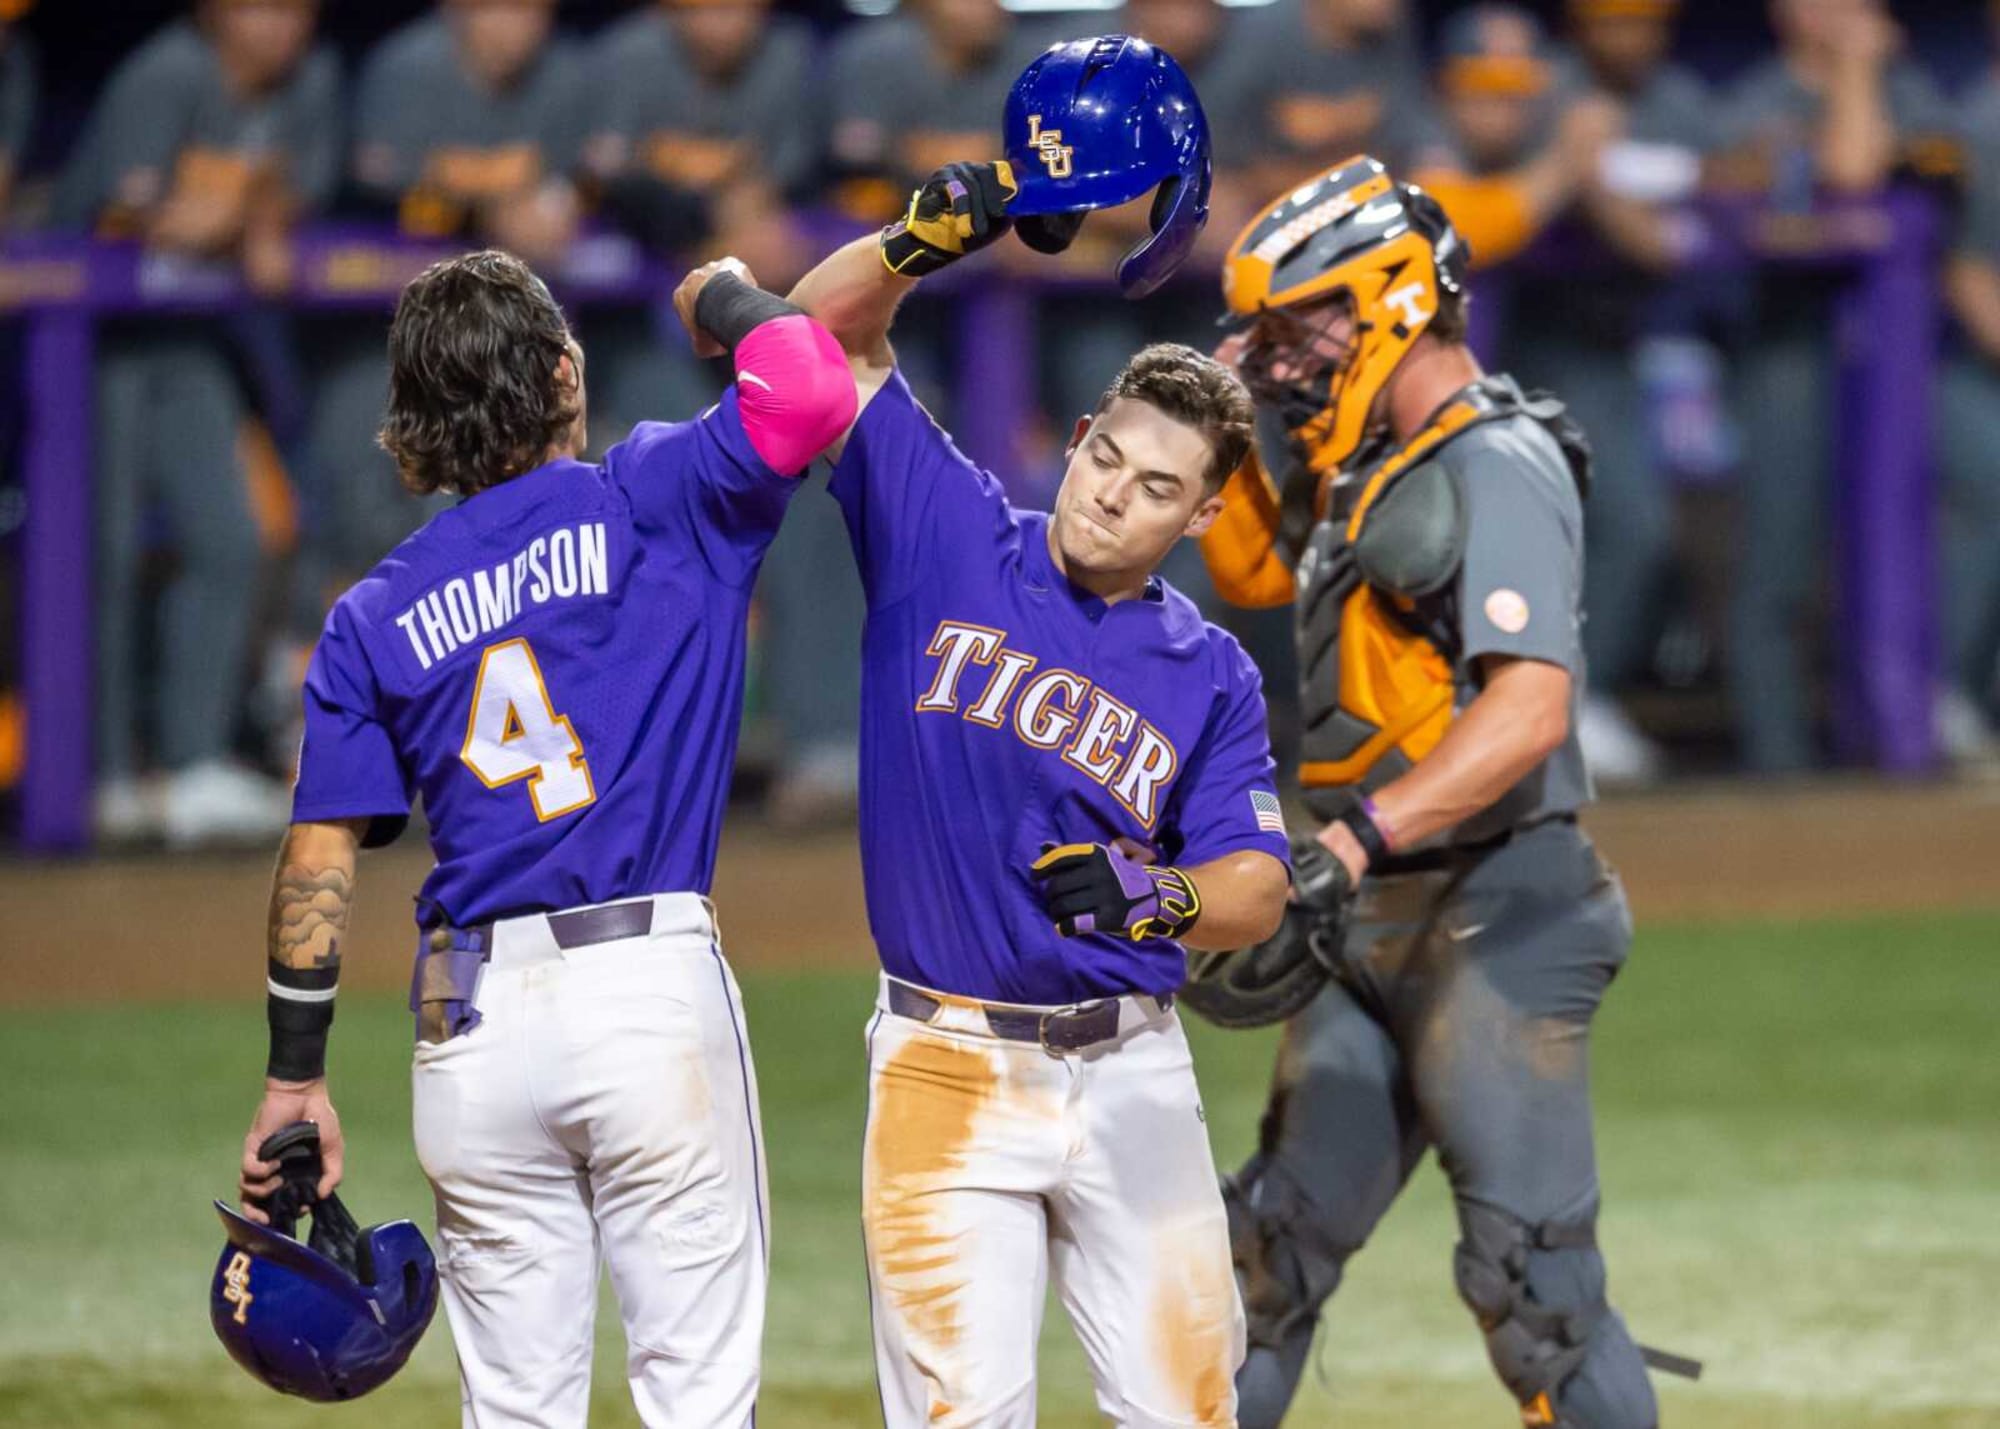 LSU baseball: When and where the Tigers will play in the SEC Tournament